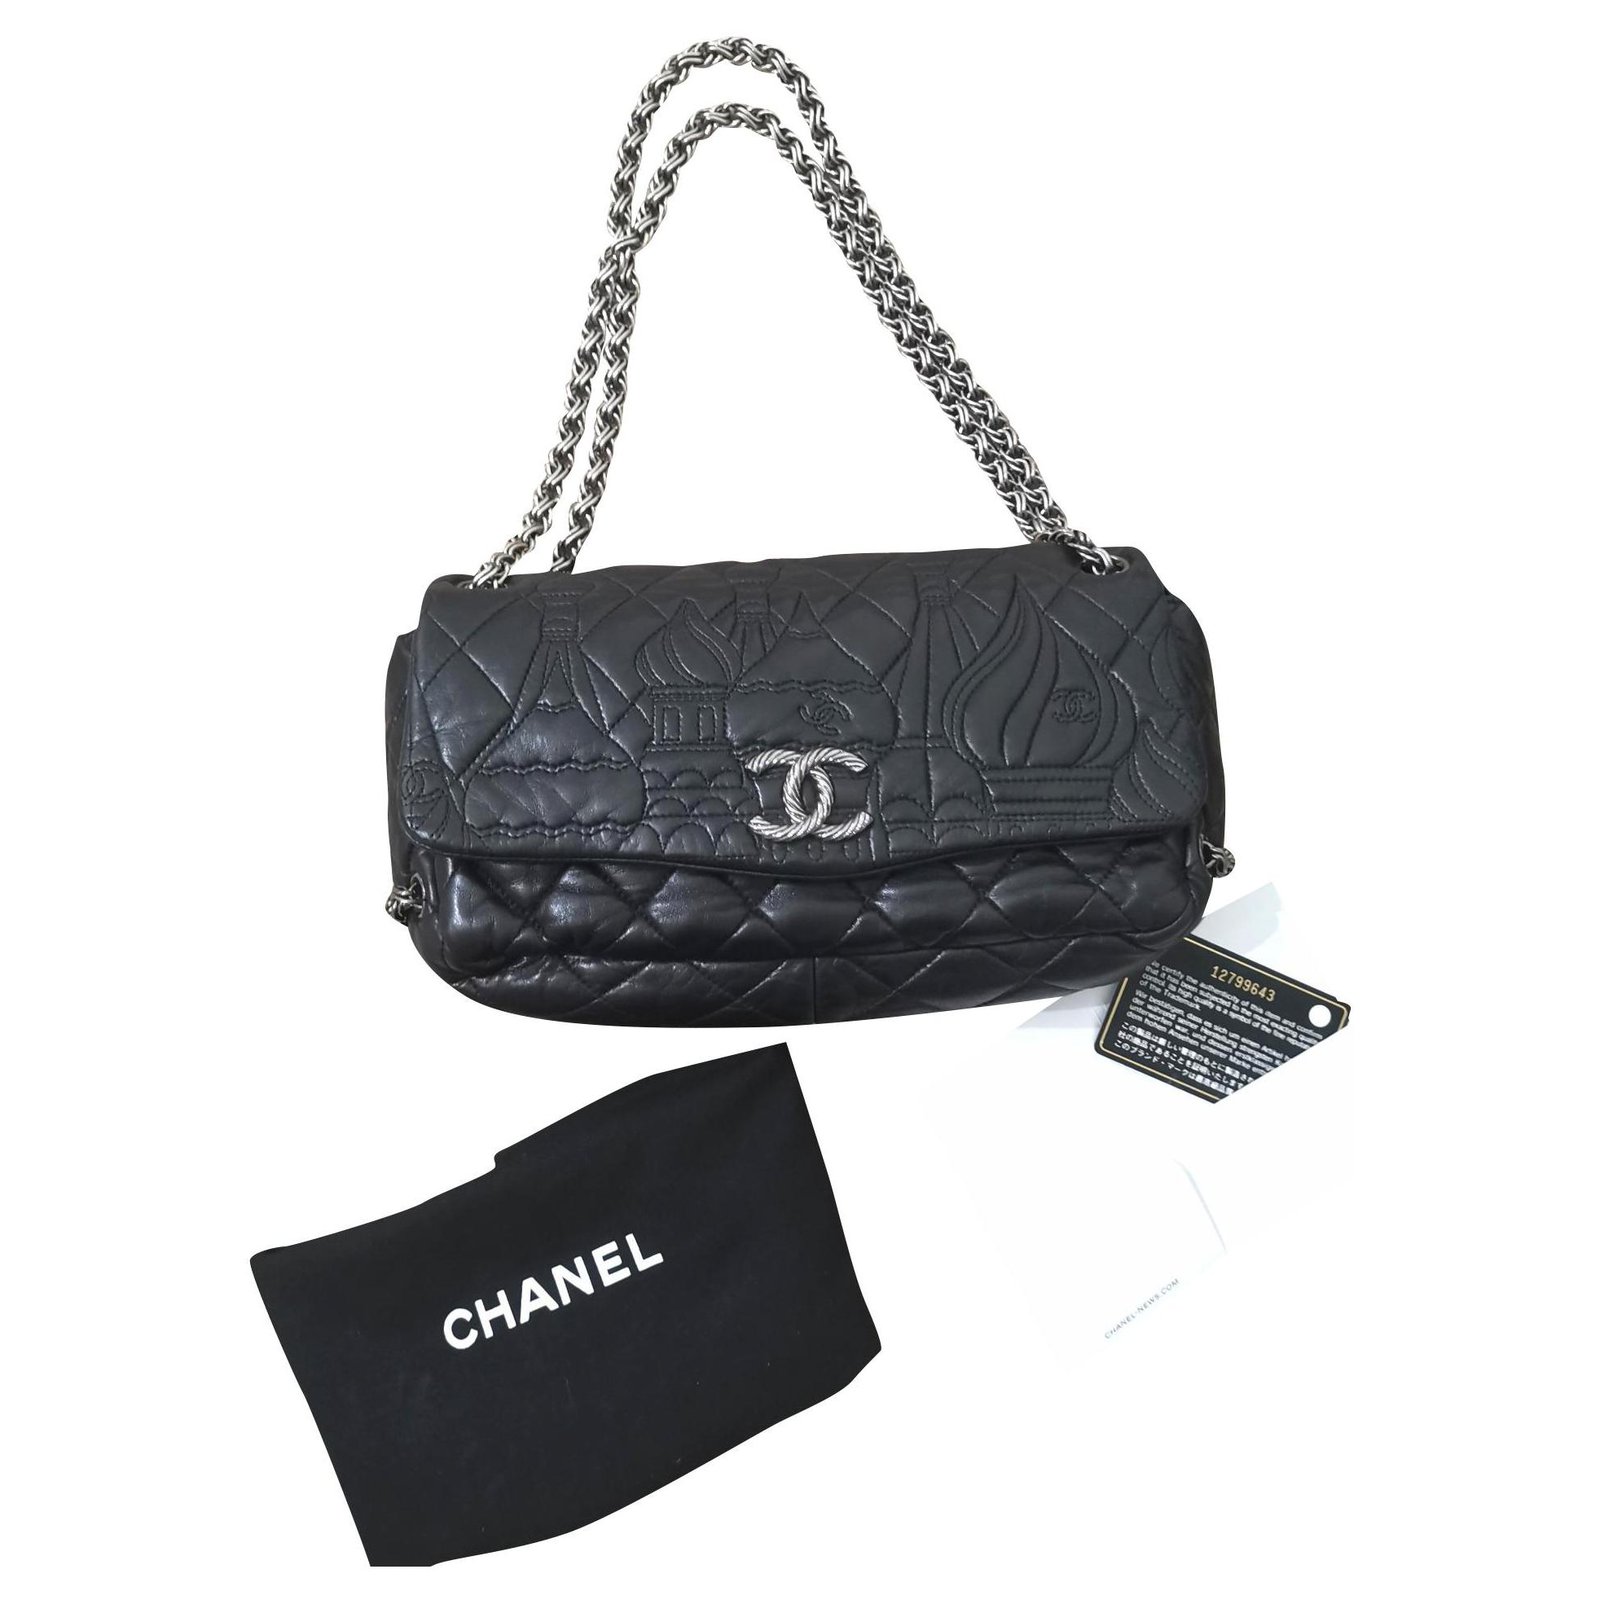 Moscow, Russia, 2021 - Chanel logo on black paper bags with